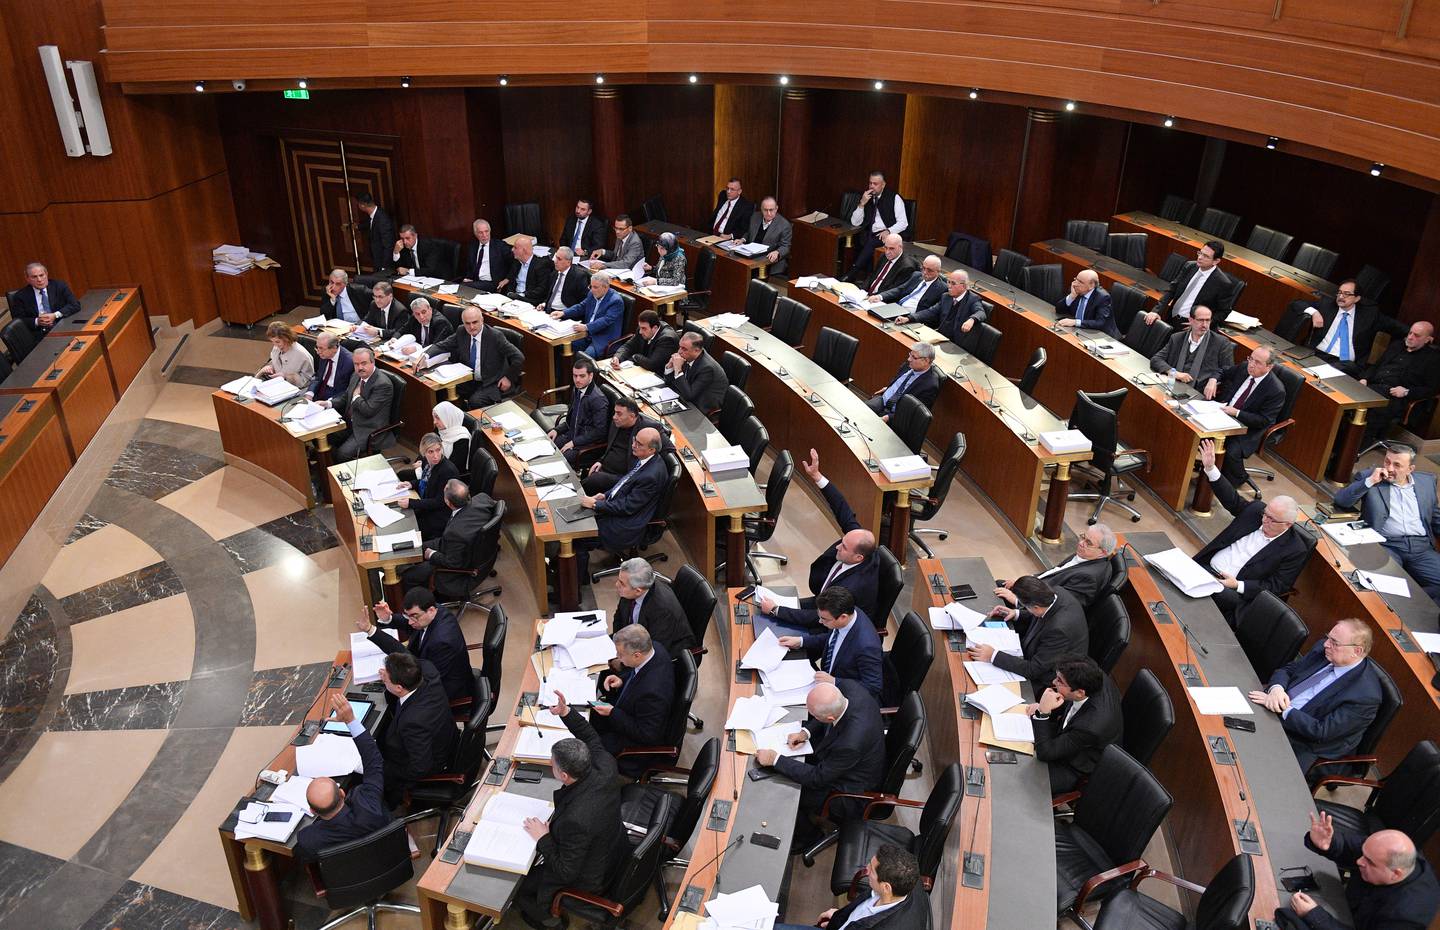 In this photo released by the Lebanese Parliament media office, Lebanese lawmakers vote for the 2020 budget at the parliament, in Beirut, Lebanon, Monday, Jan. 27, 2020. Under heavy security, Lebanese lawmakers on Monday endorsed a state budge for 2020 at a controversial session held amid a crippling financial crisis gripping the country. Outside the parliament building, protesters threw stones and sticks at security, who beat them back and detained several of the demonstrators. (AP Photo/ Hassan Ibrahim, Lebanese Parliament media office)